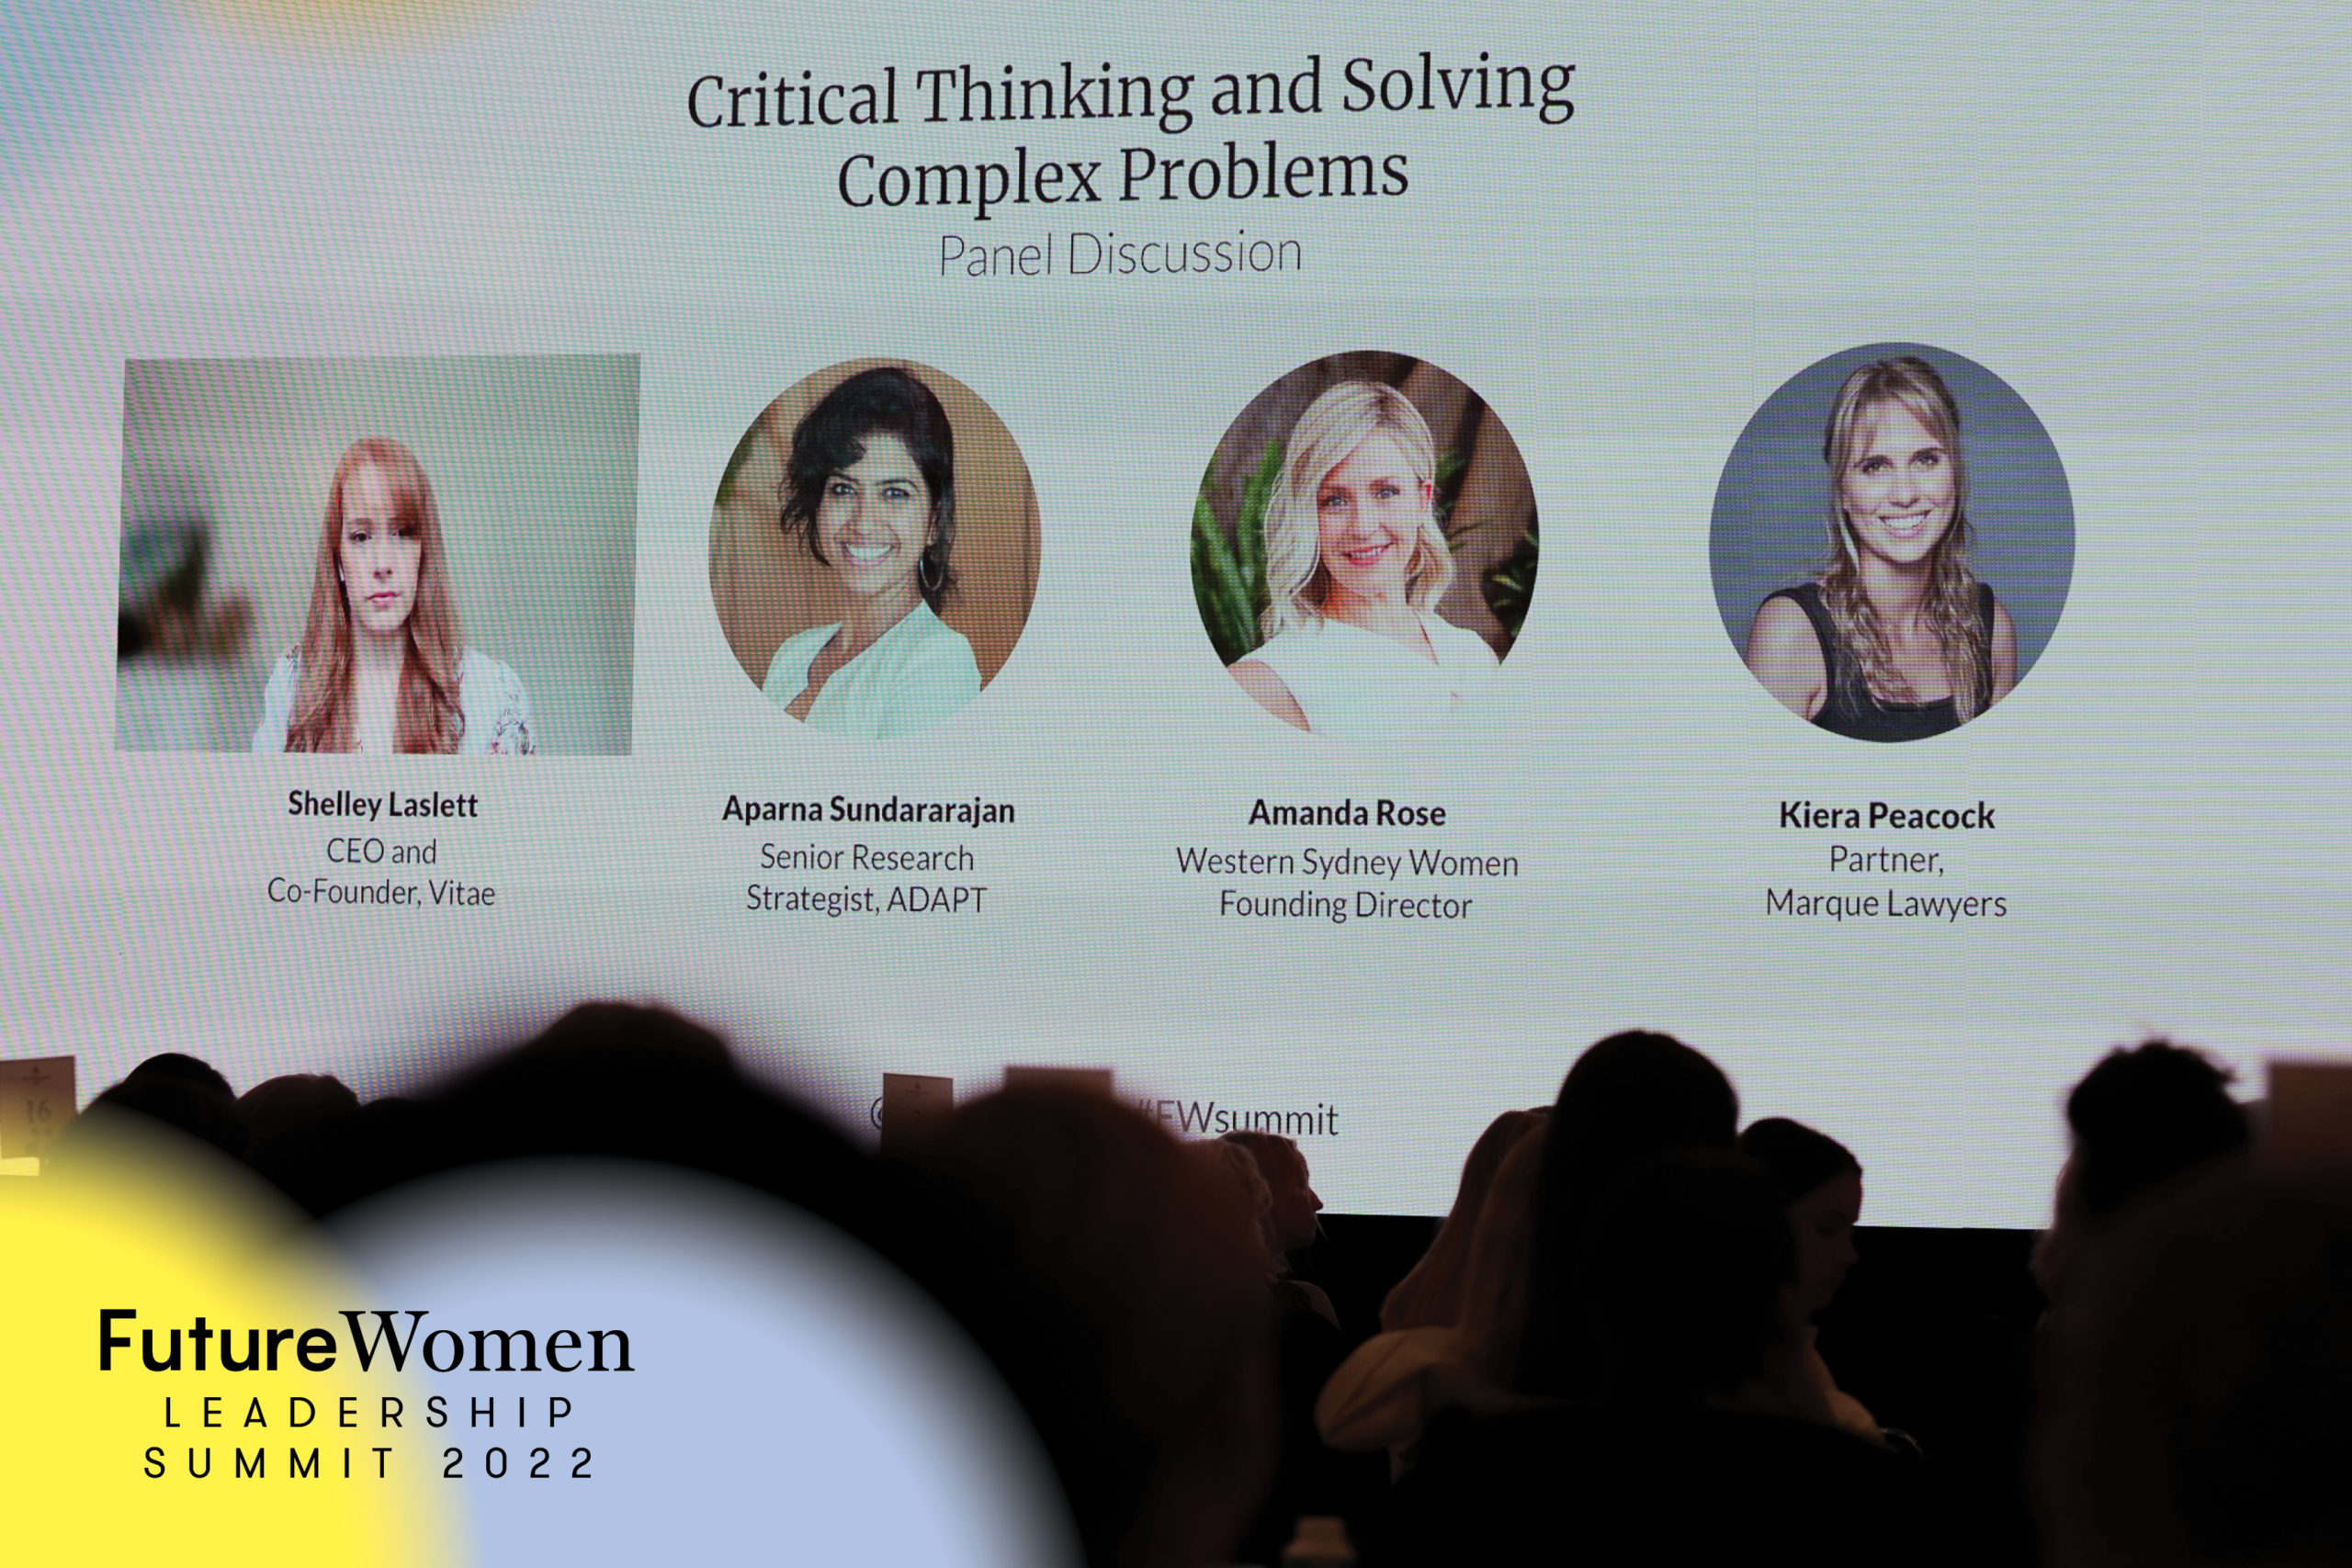 The expert panel on critical thinking and solving complex problems at Future Women's Leadership Summit 2022